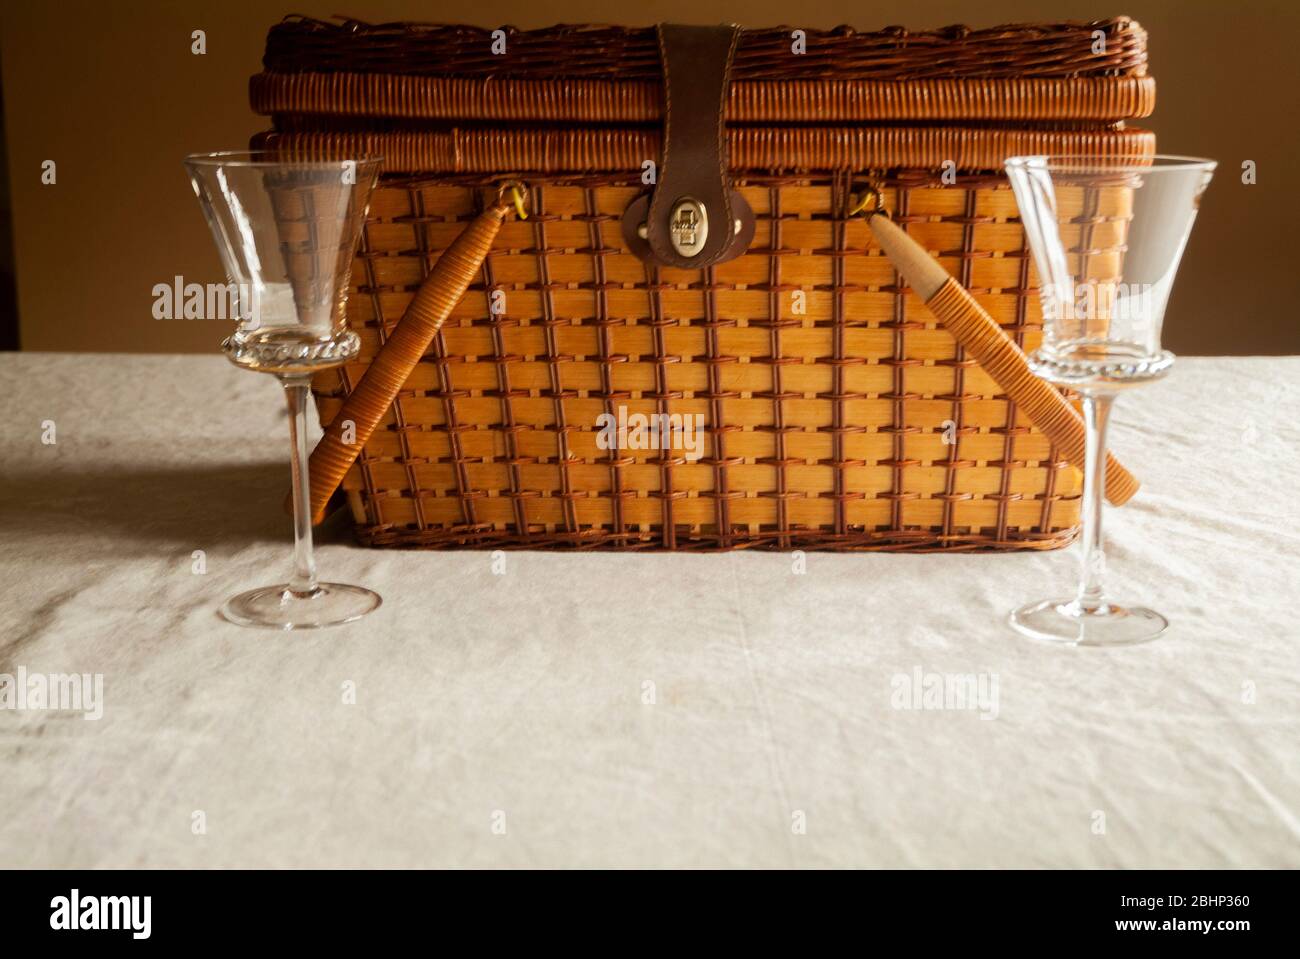 DATE NIGHT: Two wine glasses stand side by side in front of a picnic basket on a kitchen table. Stock Photo